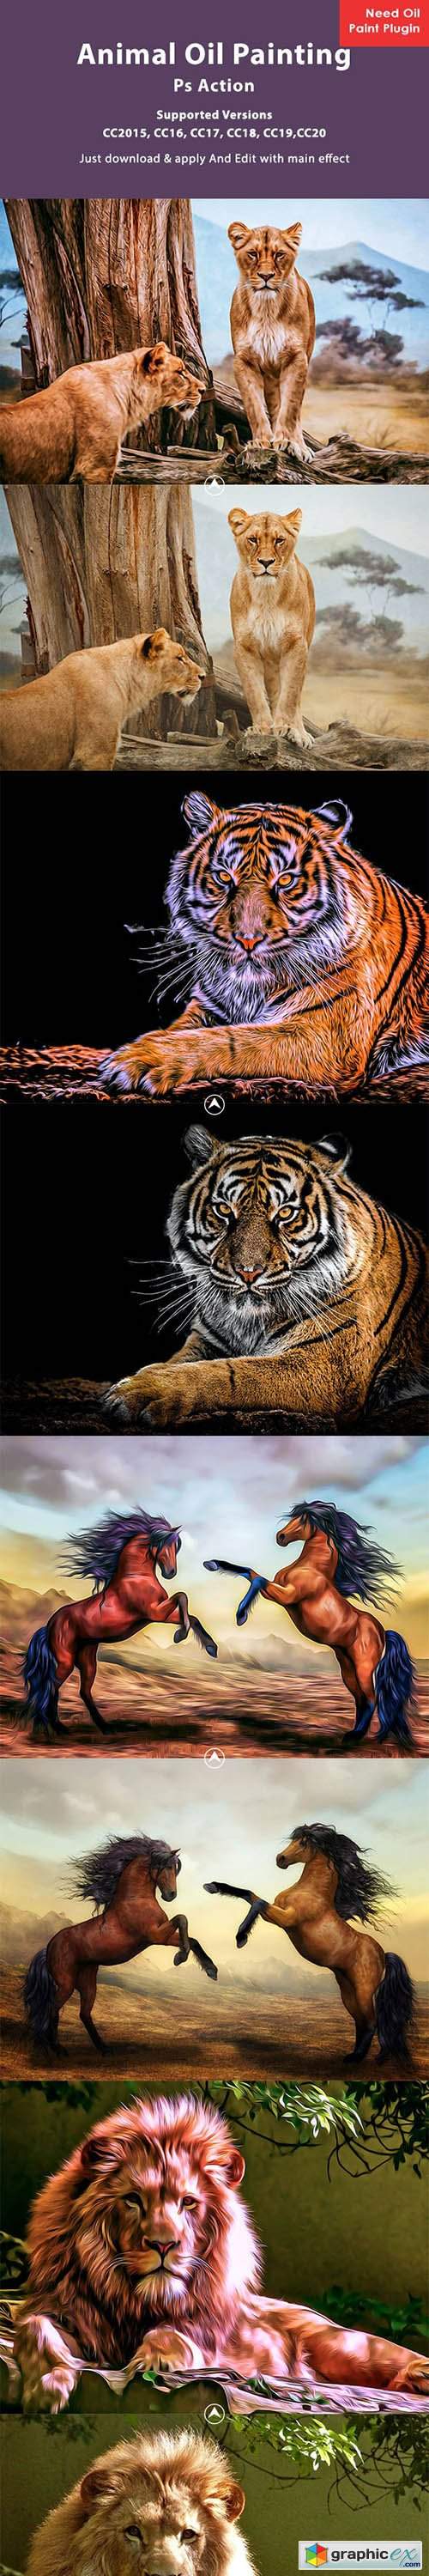 Animal Oil Painting Photoshop Action 